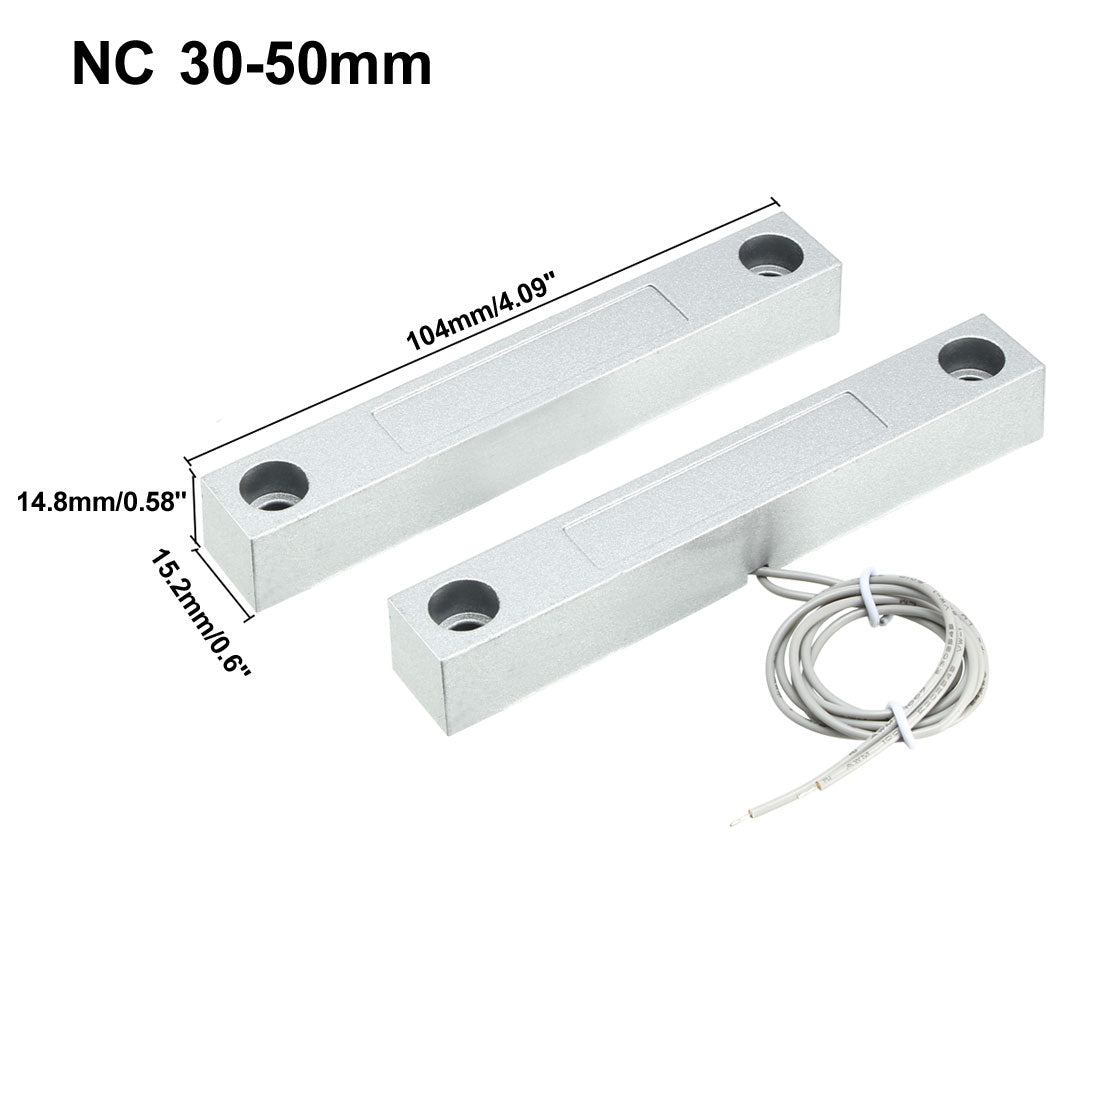 uxcell Uxcell MC-58 NC Alarm Security Rolling Gate Garage Door Contact Magnetic Reed Switch Silver Gray